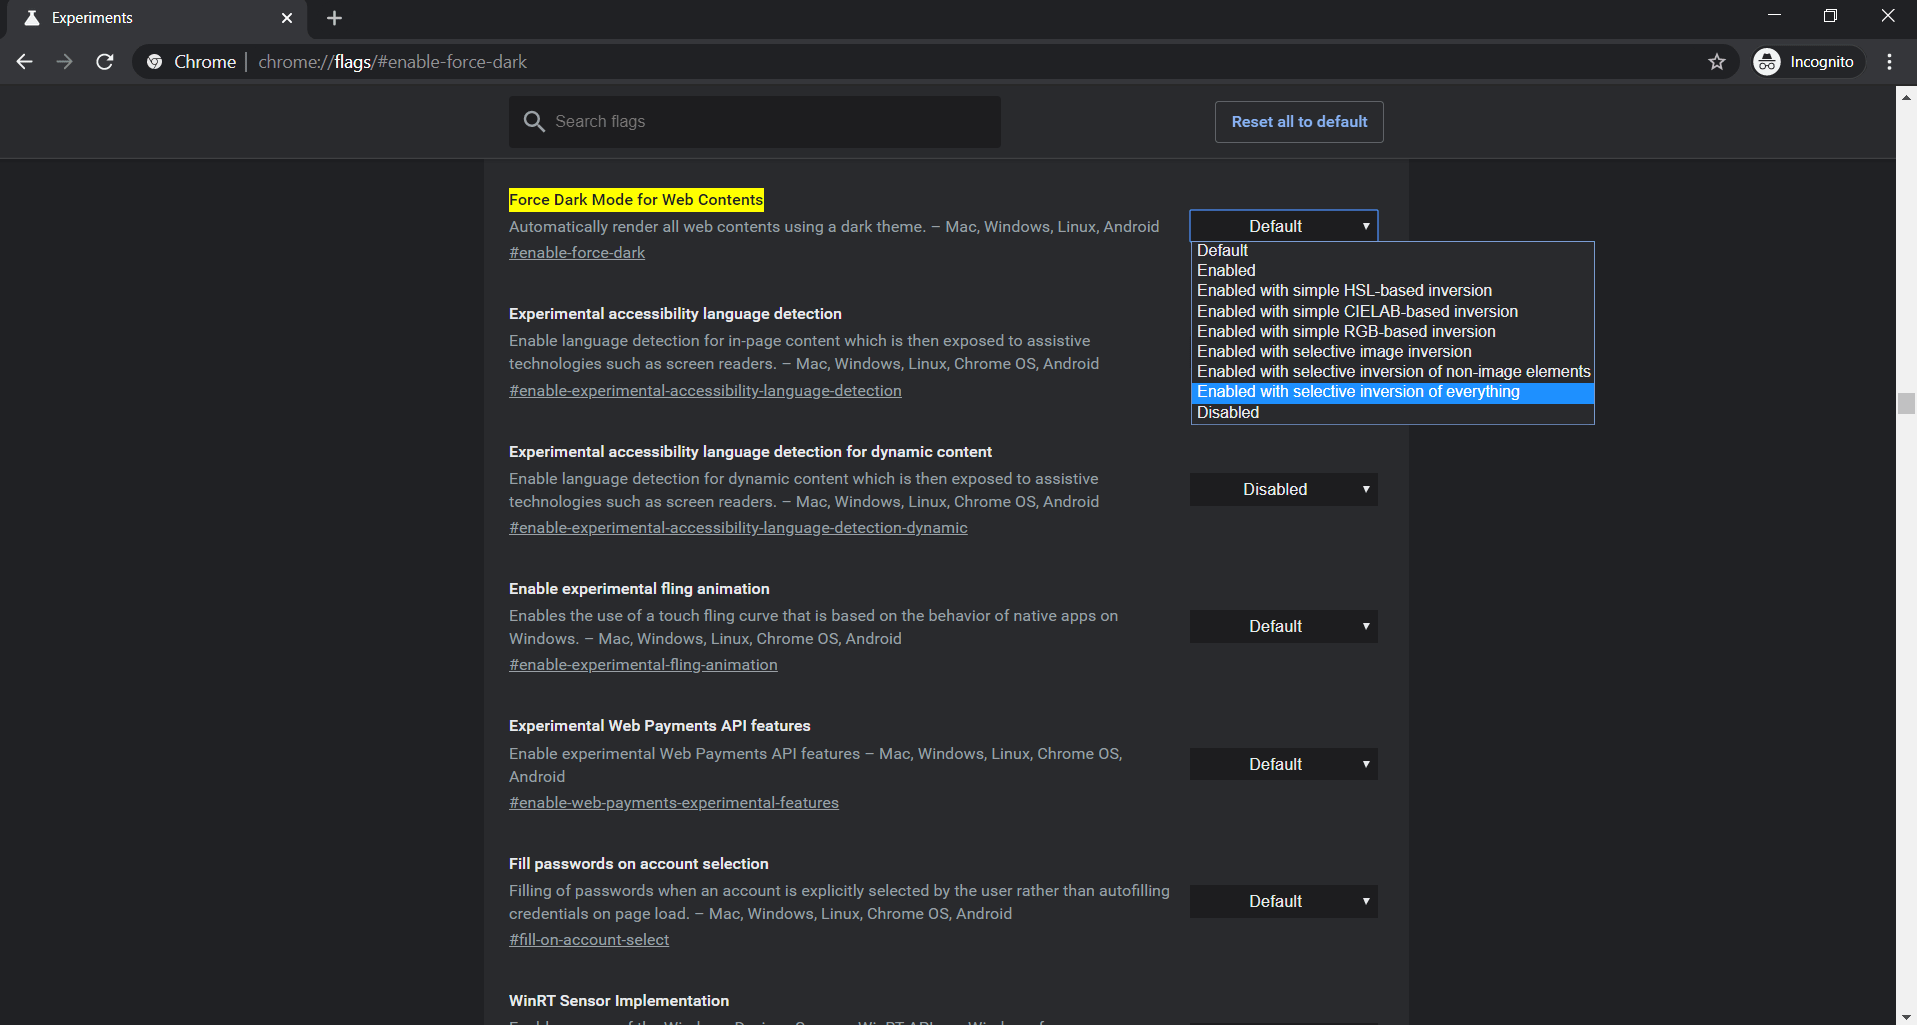 Force Dark Mode for Web Contents